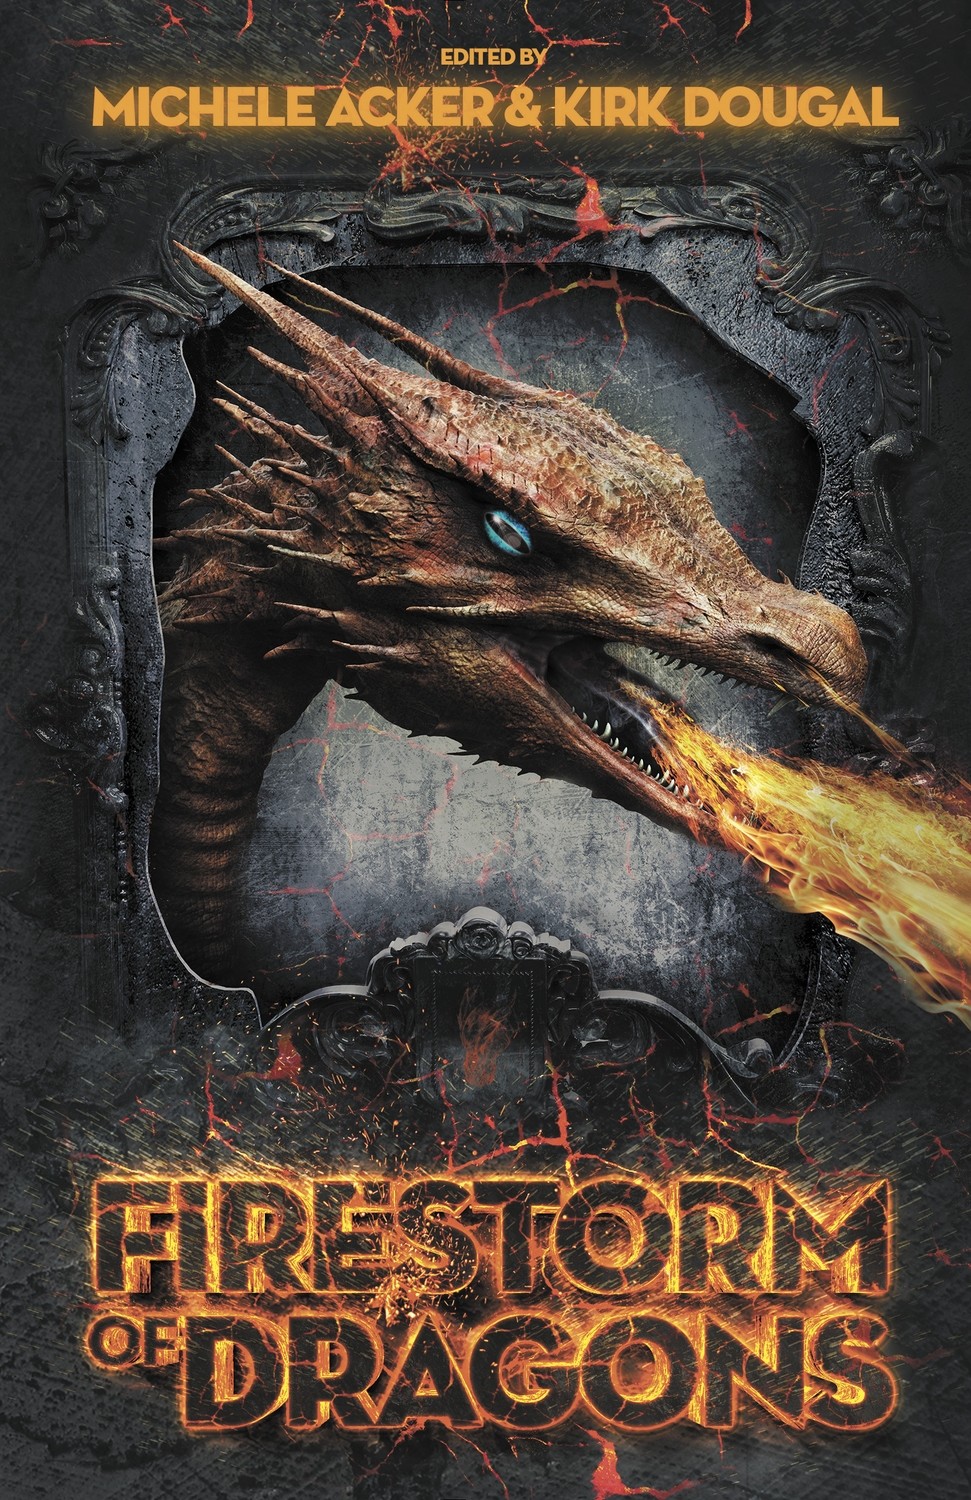 Firestorm of Dragons Edited by Michele Acker and Kirk Dougal